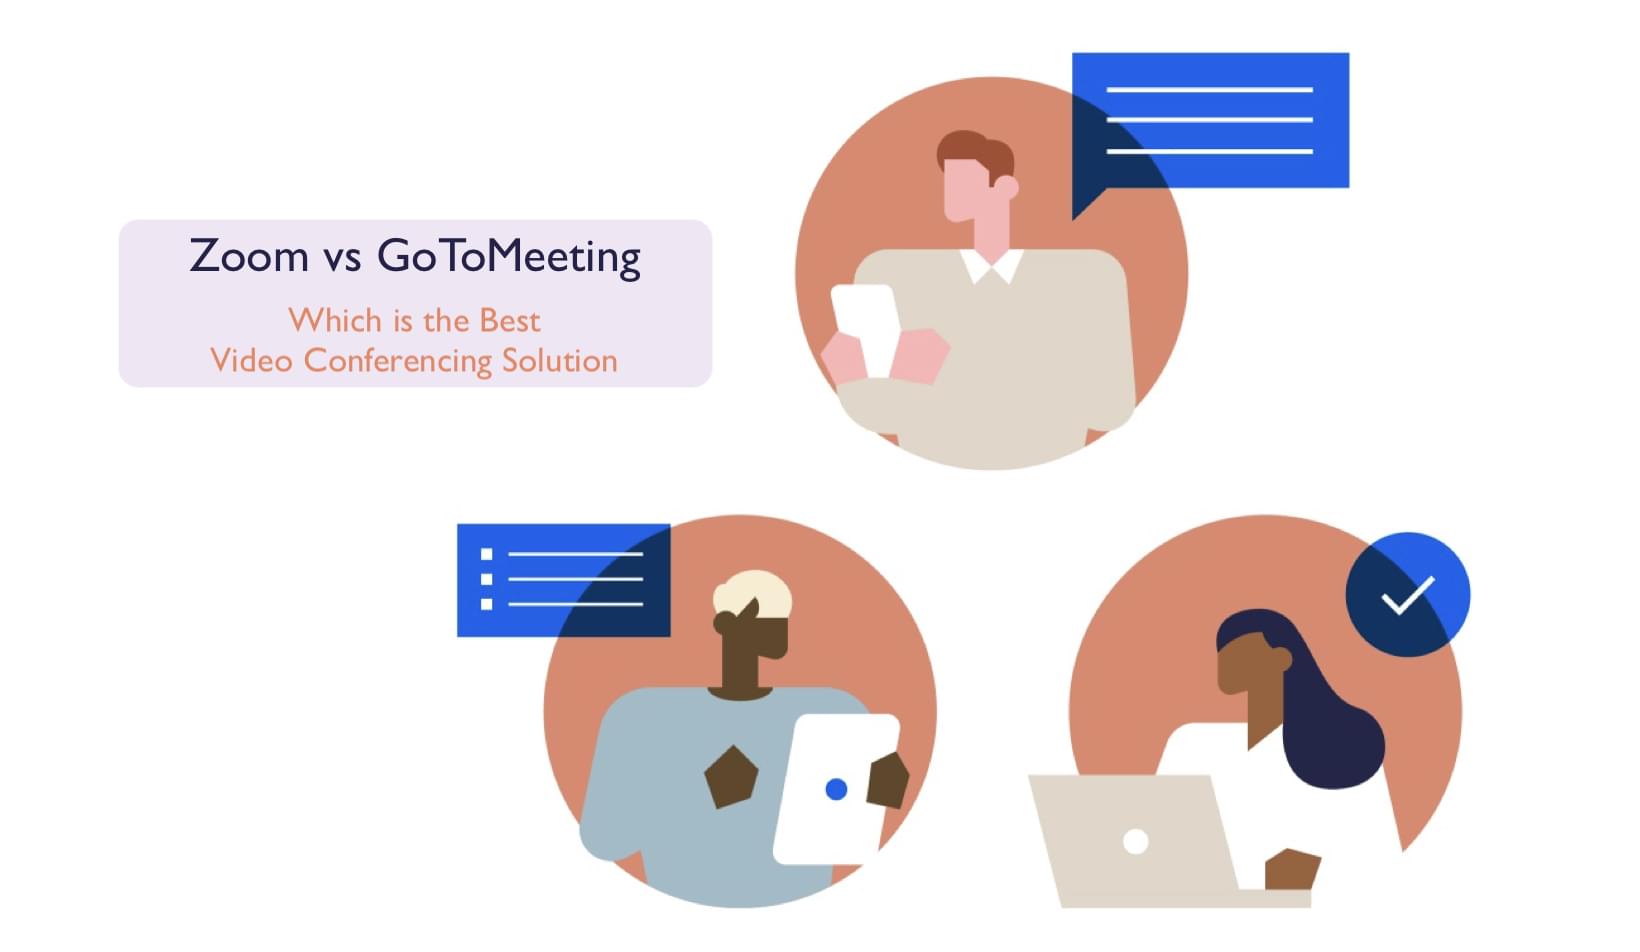 Zoom vs GoToMeeting: Which is the Best Video Conferencing Solution?